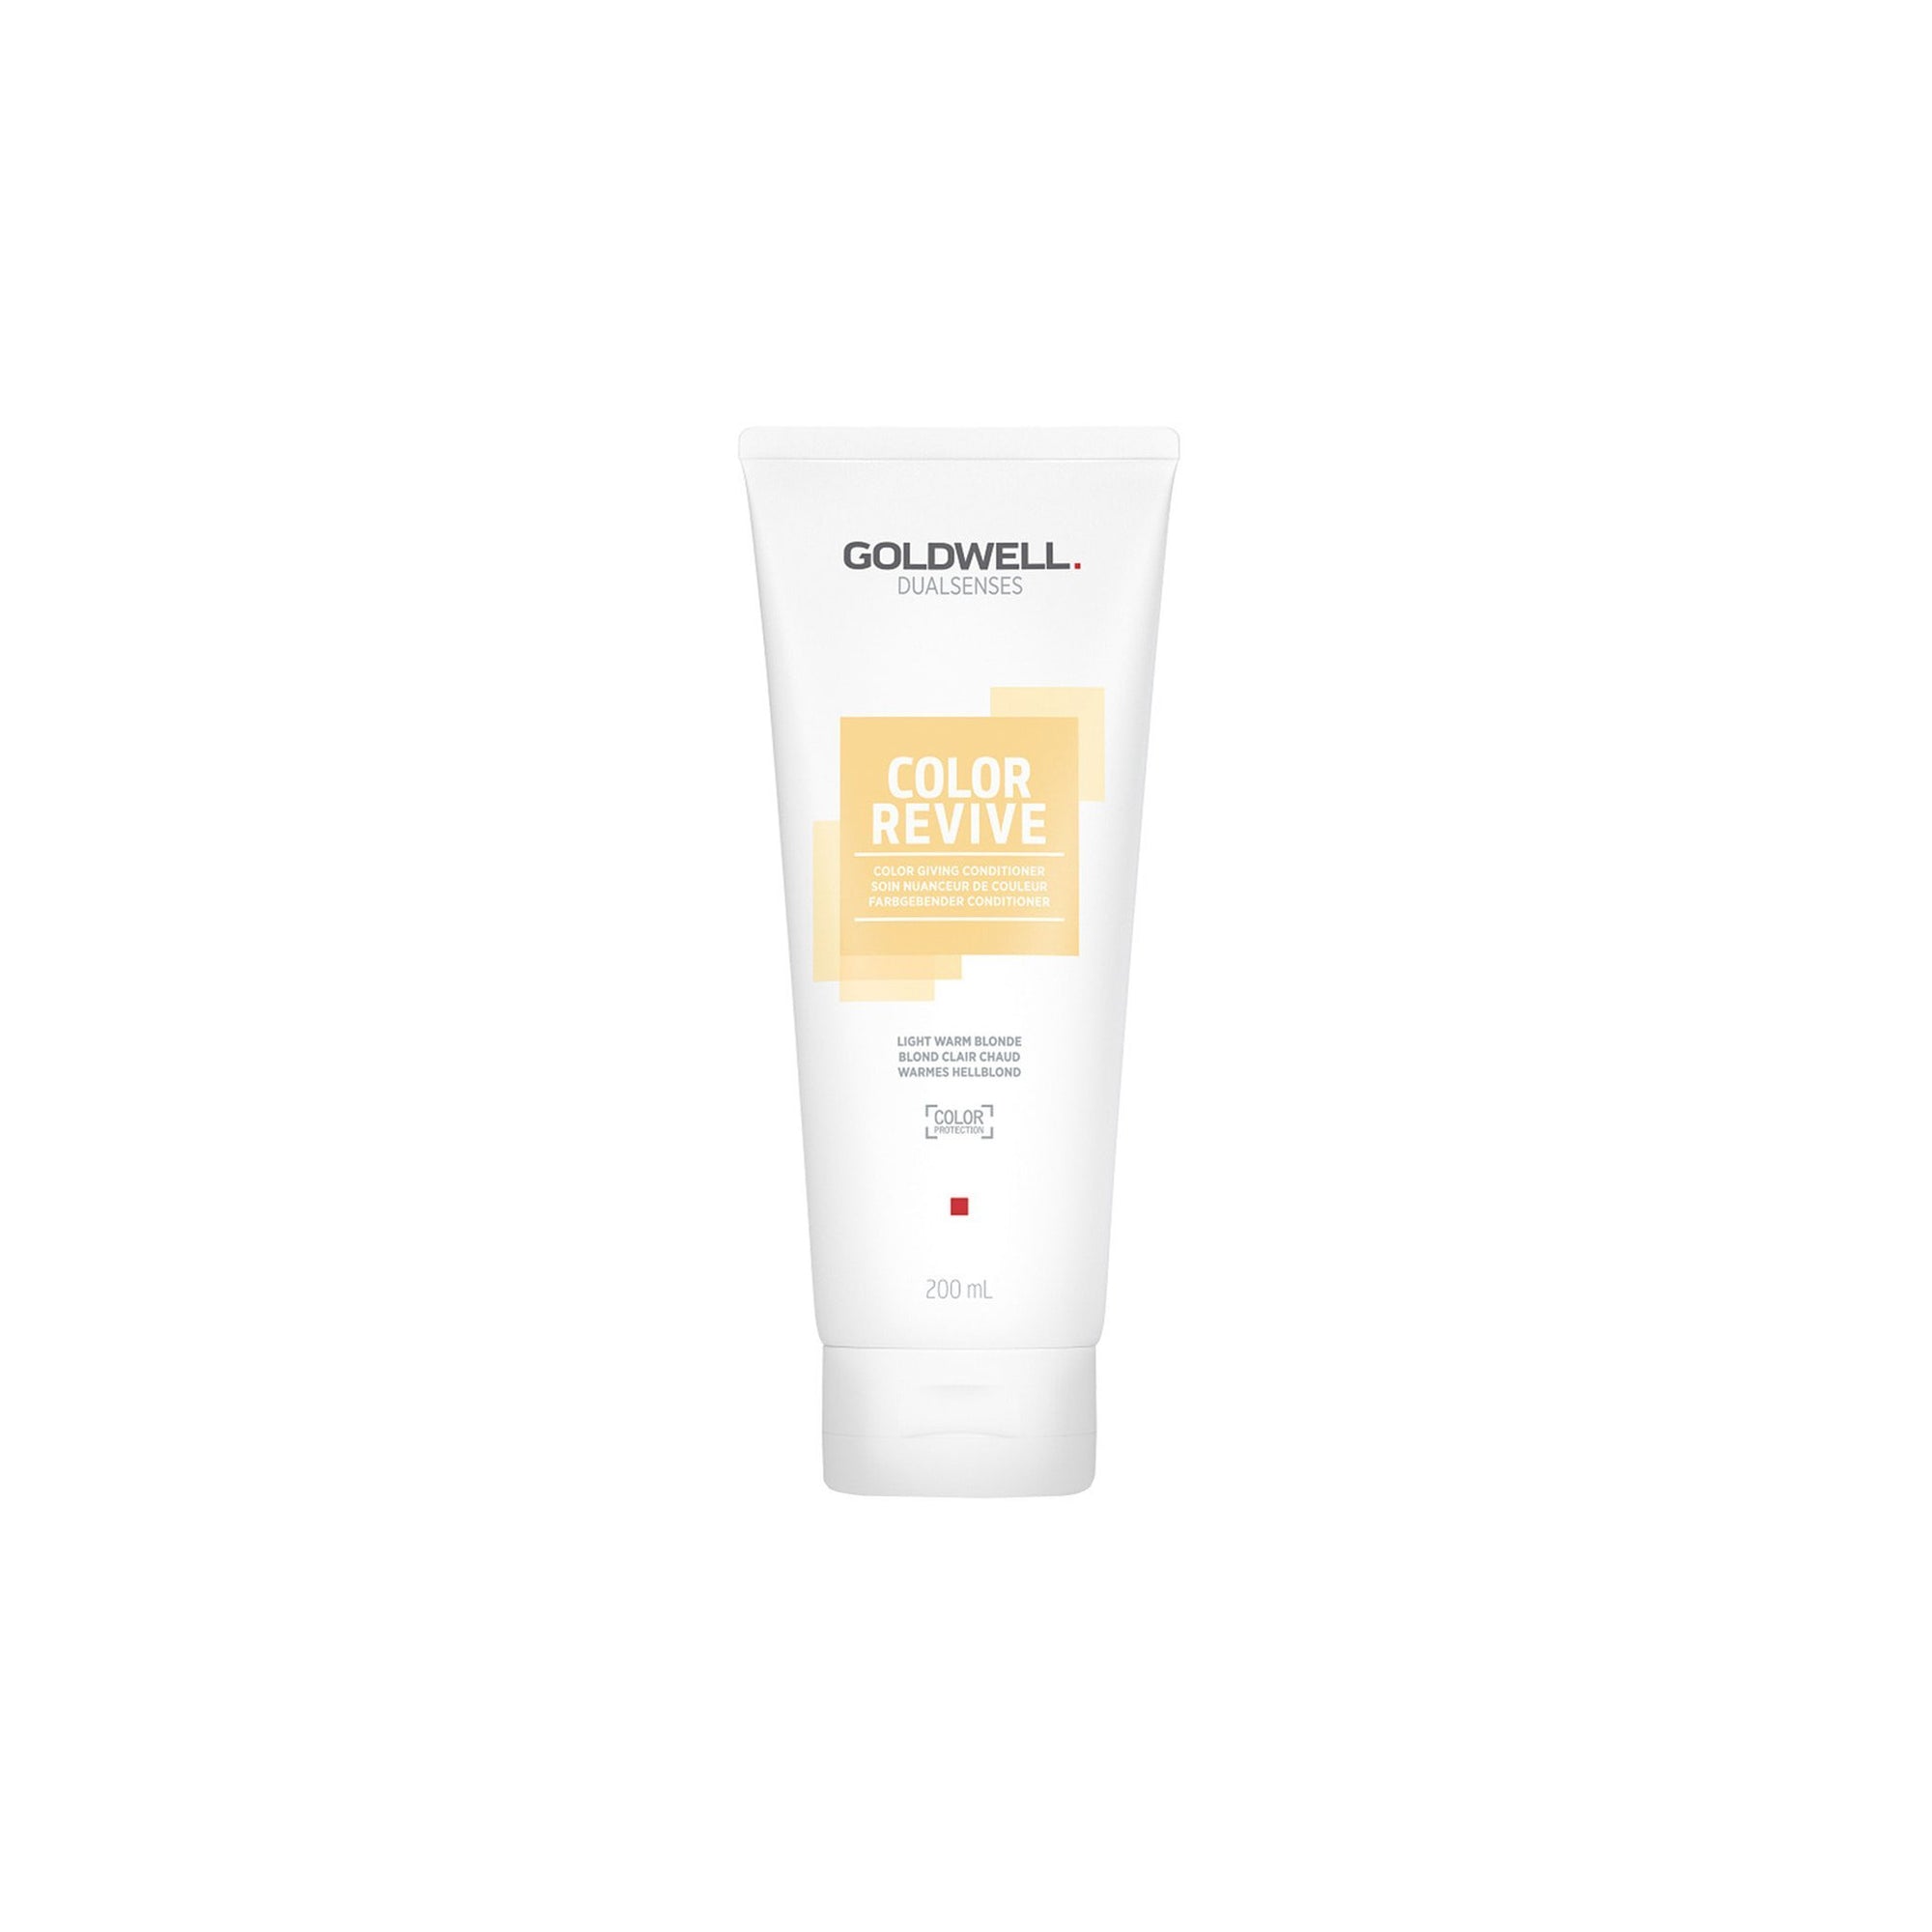 Goldwell Dualsenses Color Revive Color Giving Conditioner 200 ml - Light Warm Blonde